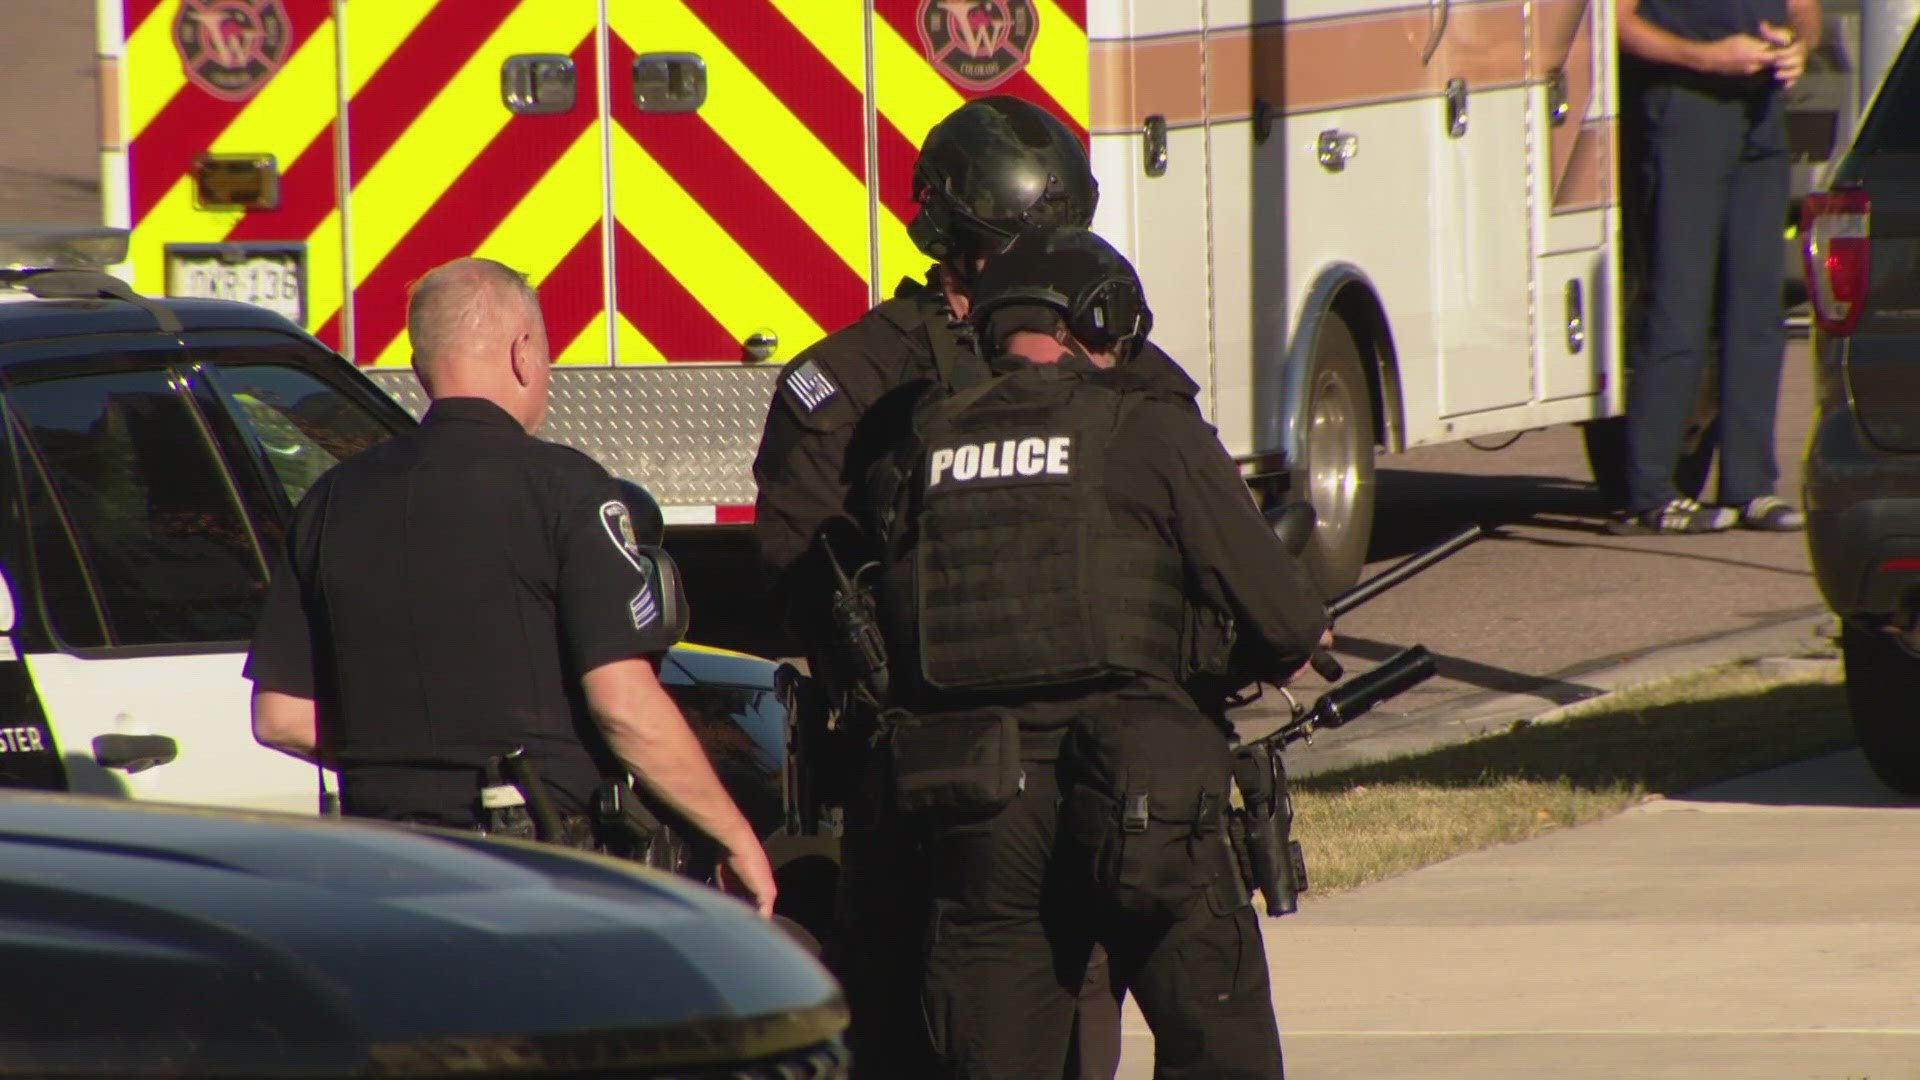 A woman is in custody and two law enforcement officers are hurt following an hours-long standoff in Westminster.